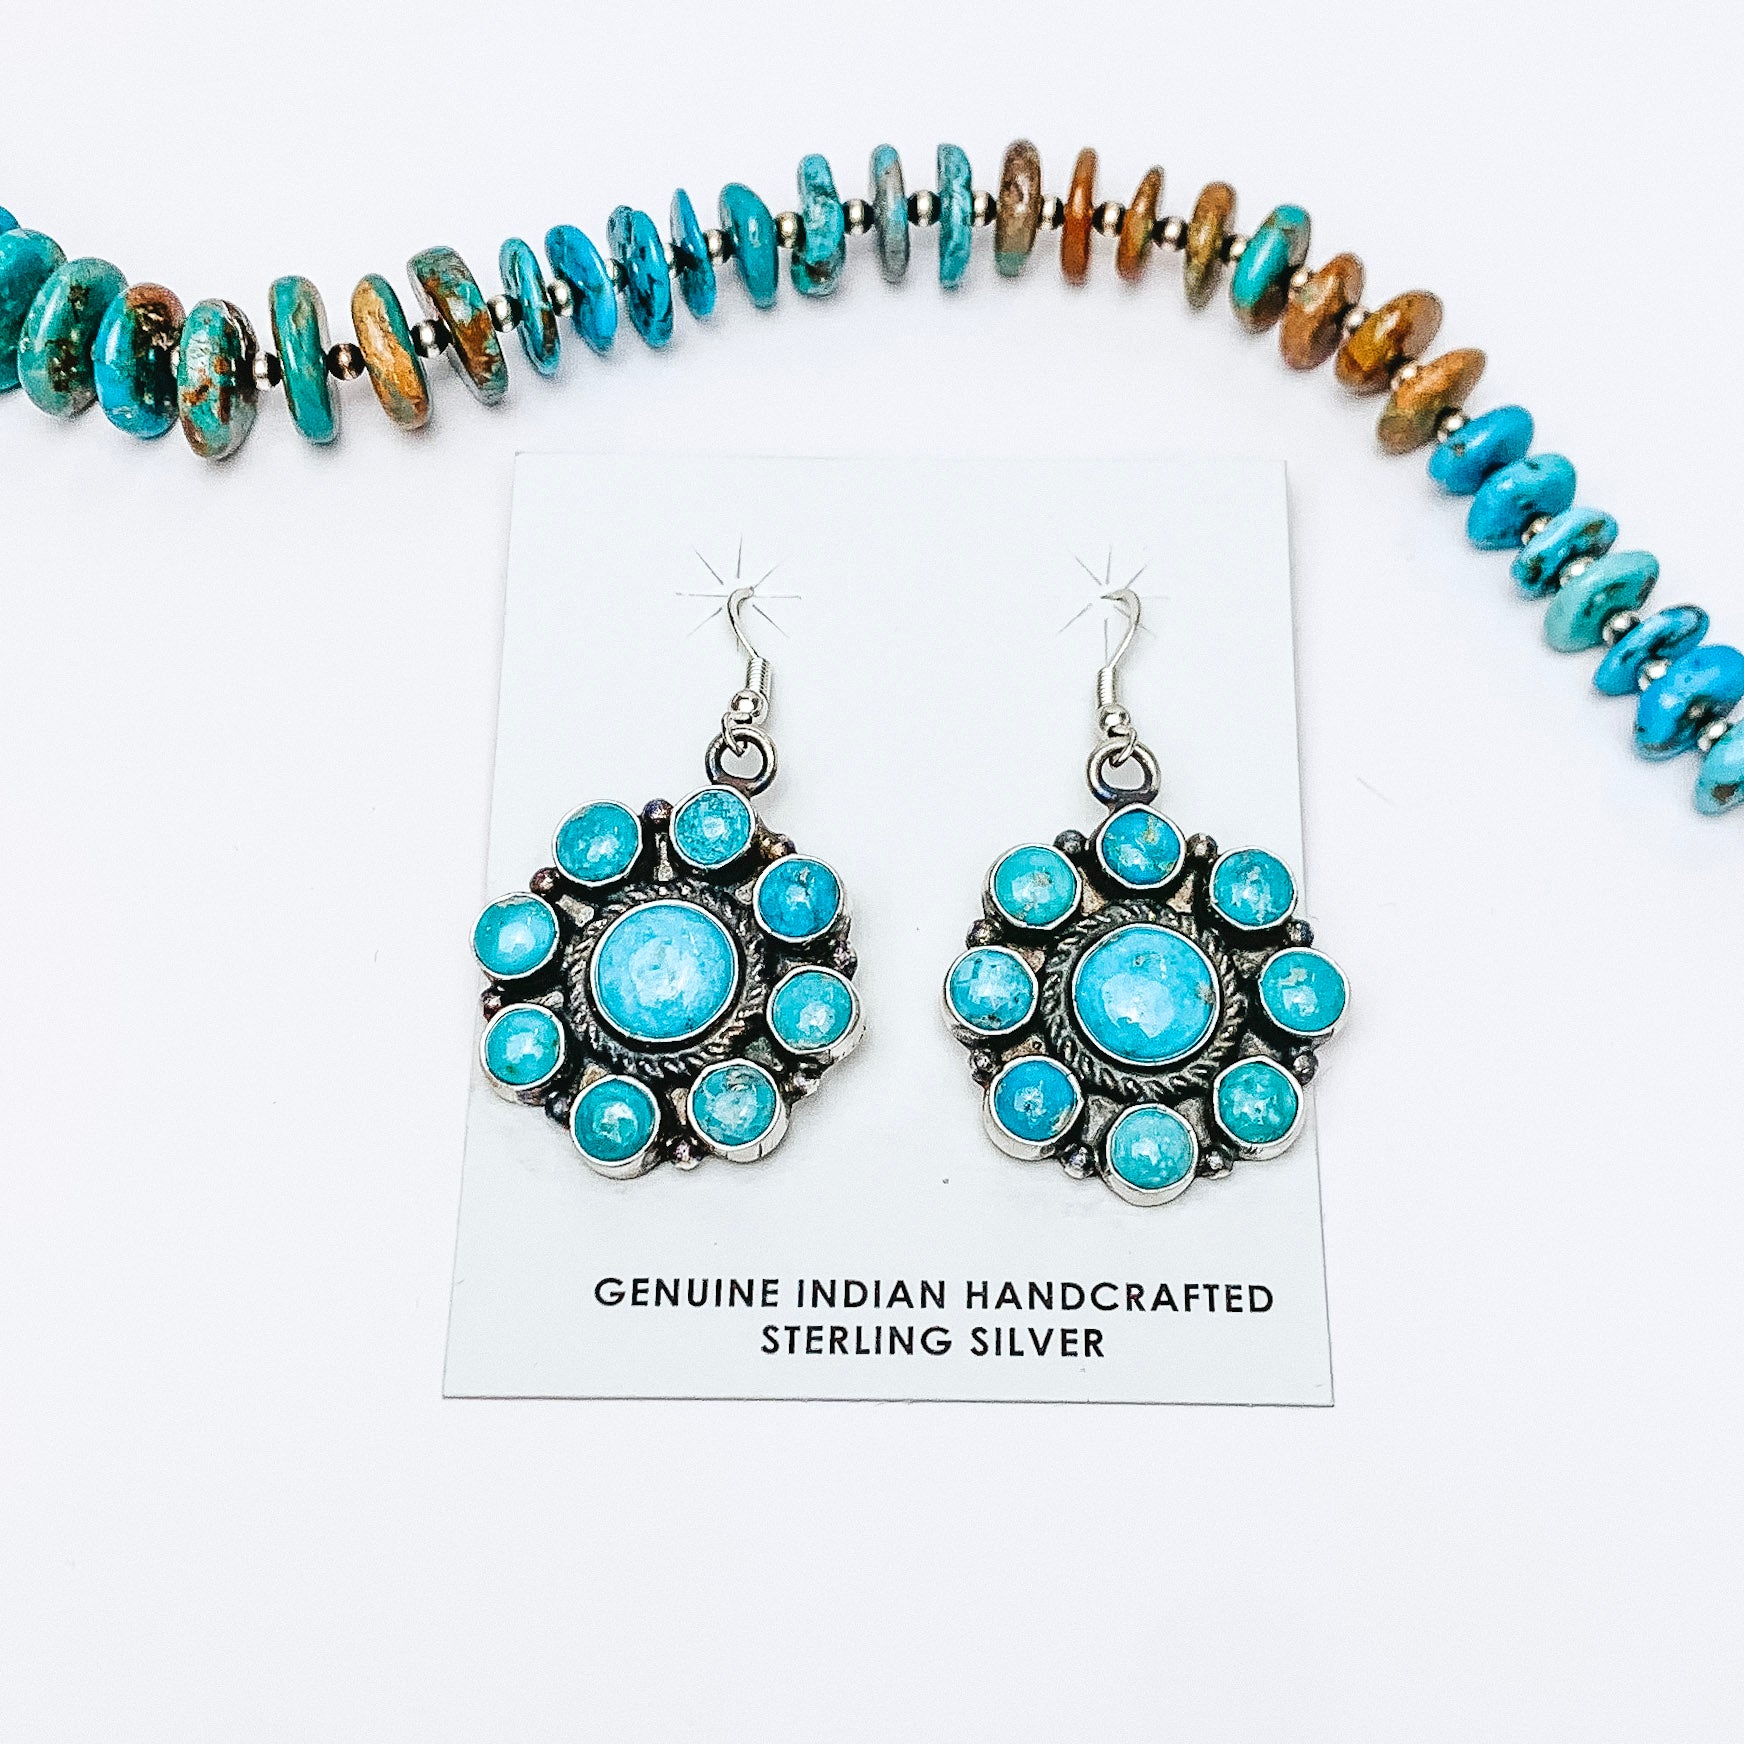 Centered in the middle of the picture is turquoise drop earrings. Above the earrings is a turquoise necklace, all on a white background. 